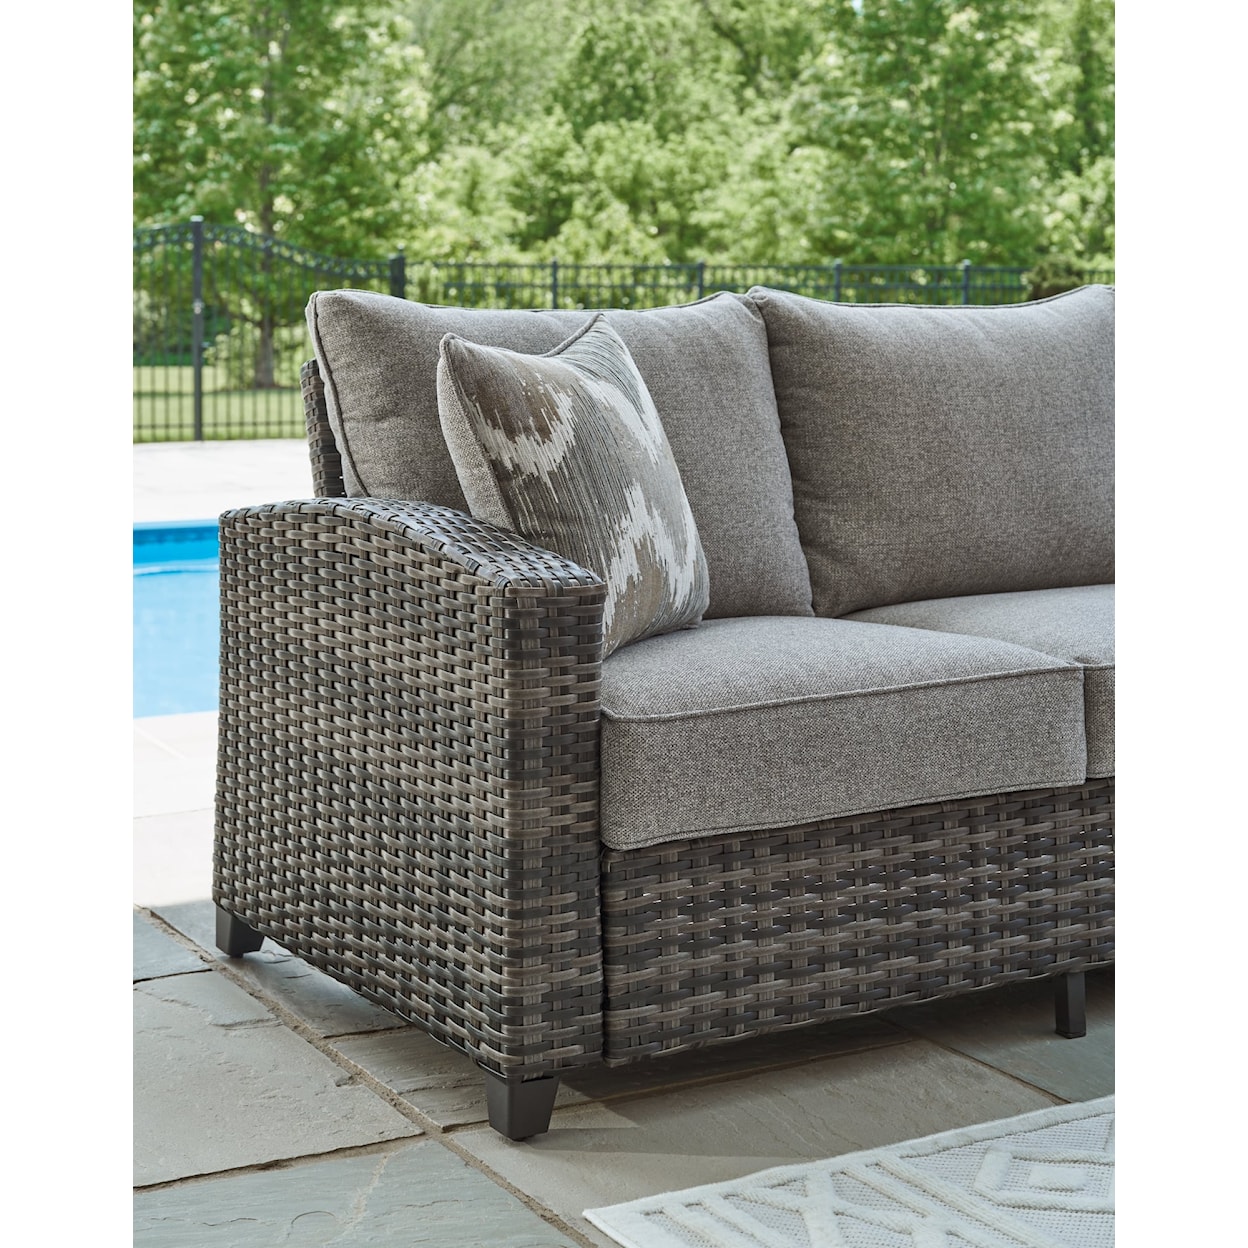 Ashley Furniture Signature Design Oasis Court Outdoor Sofa/Chairs/Table Set (Set of 4)